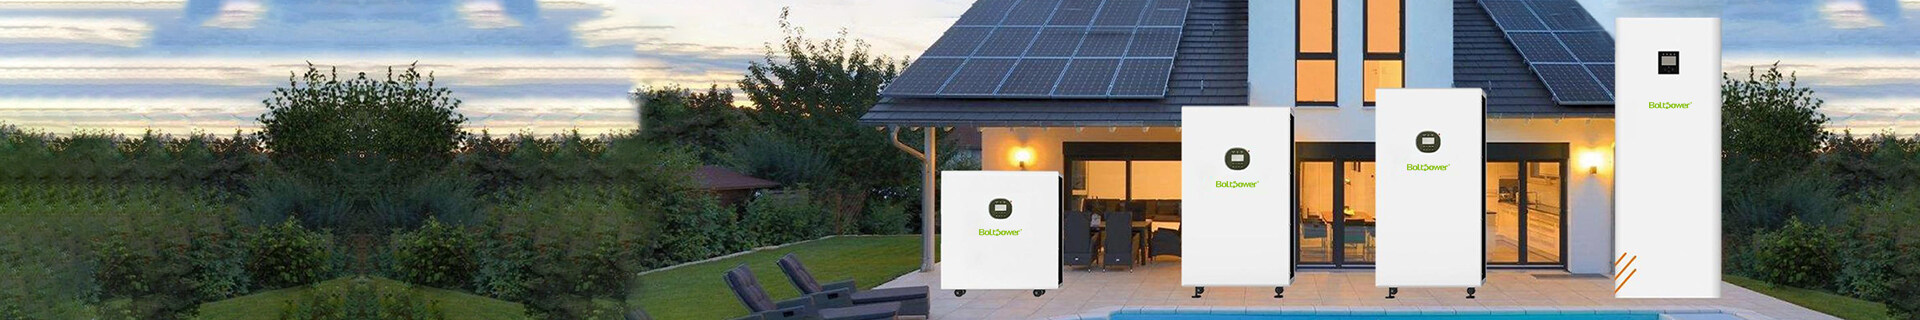 Boltpower AP-80192 8Kw 19.2KWh Residential Solar Energy Storage Battery,Boltpower AP-5096 5Kw 9.6KWh Household Energy Storage Power,Boltpower AP-3035 3Kw 3.6KWh Home Energy Storage Power System